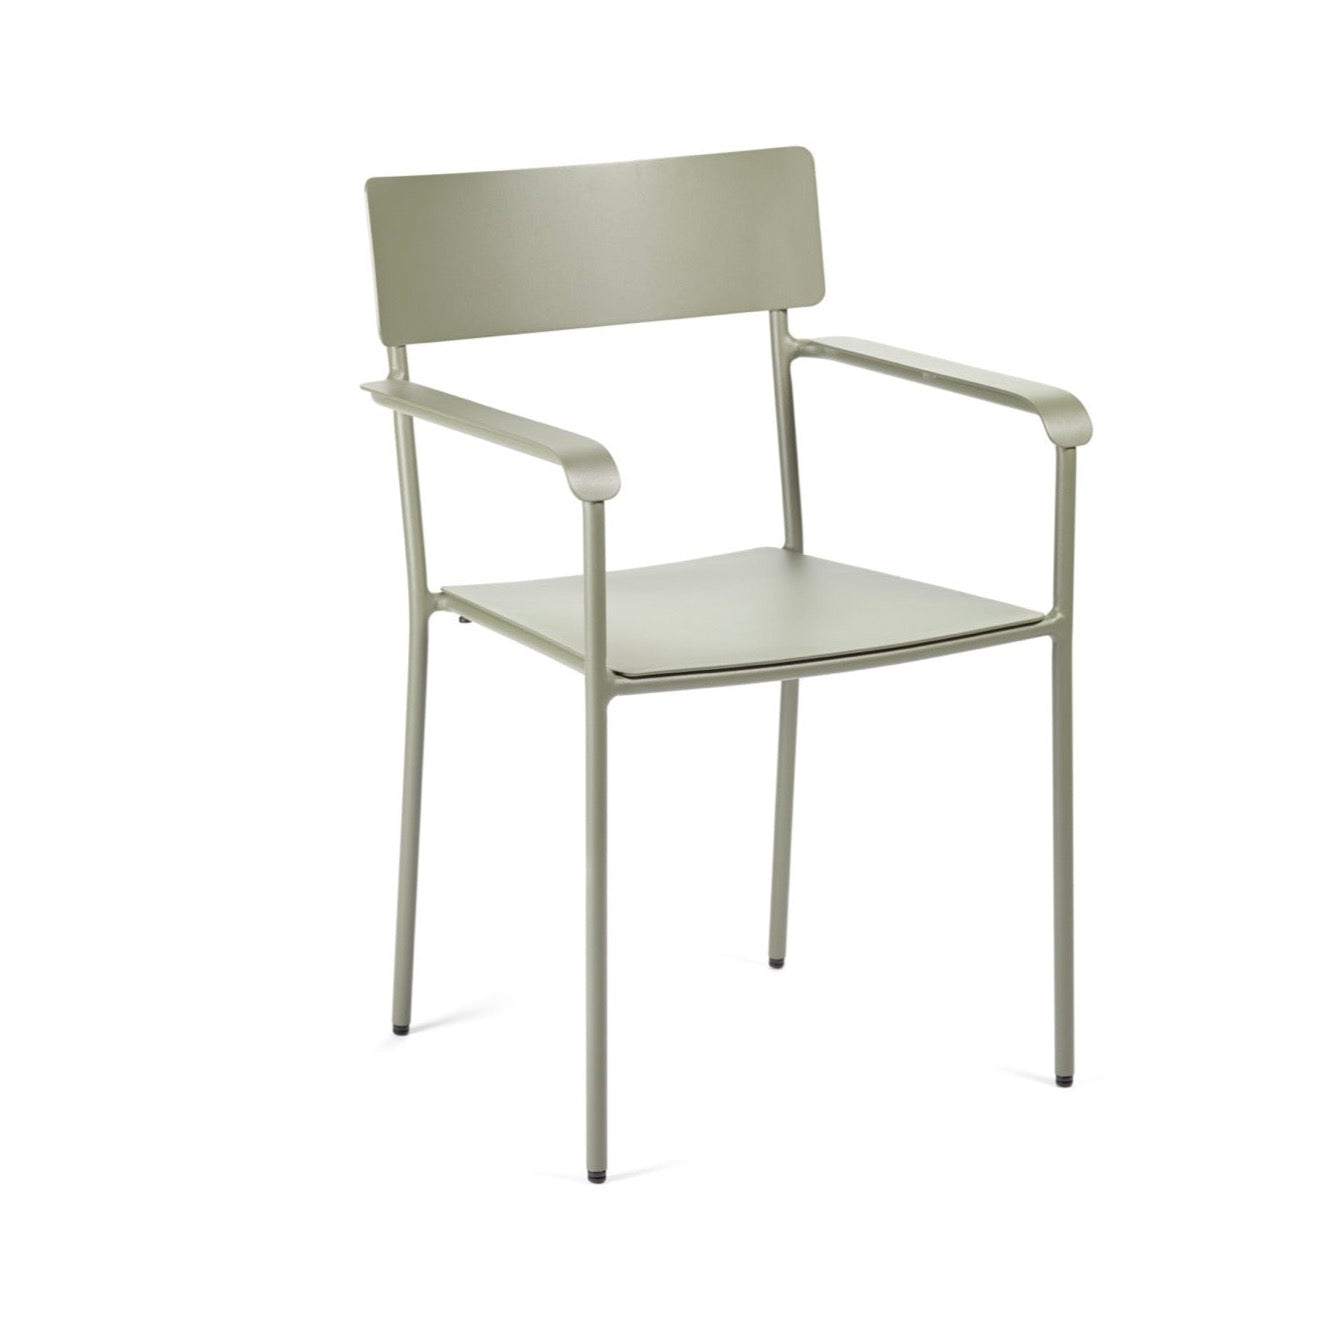 Serax August compact chair with armrests by Vincent Van Duysen set of 2